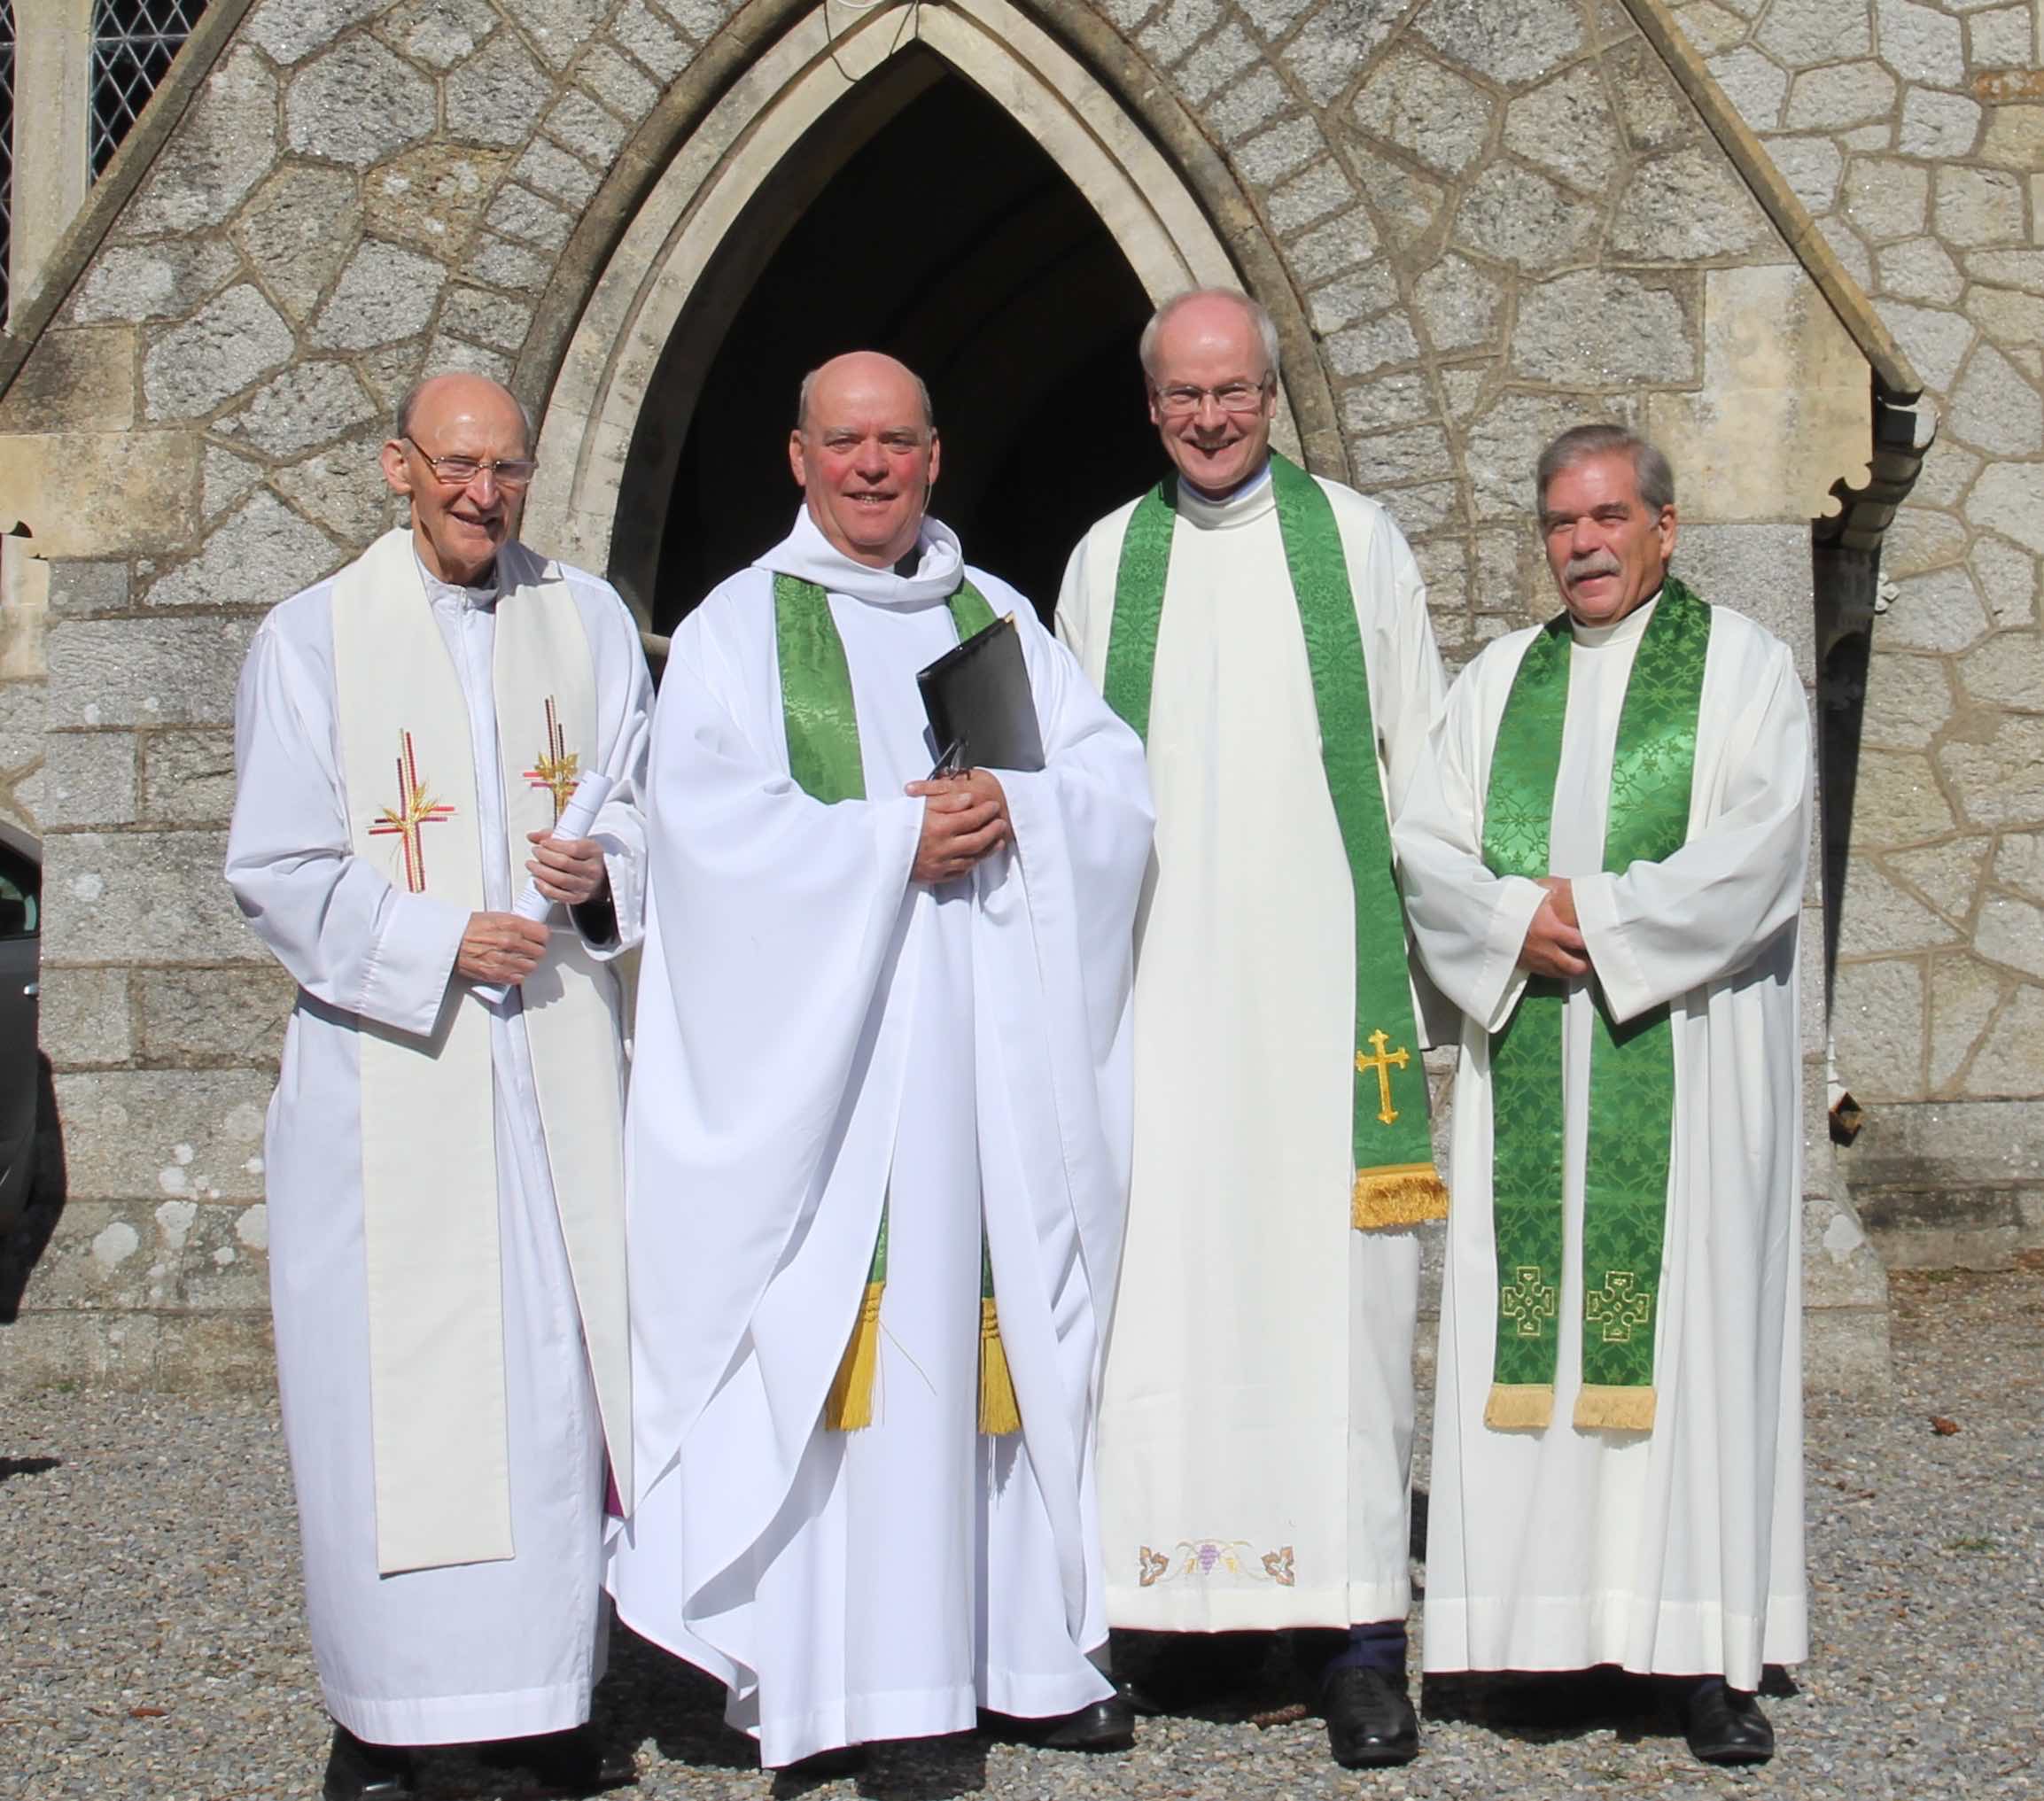 Fr John Wall, former PP of Enniskerry, Archdeacon Ricky Rountree, the Revd Niall Stratford and the Revd Terry Lilburn at Ricky's final service as Rector of Powerscourt and Kilbride.